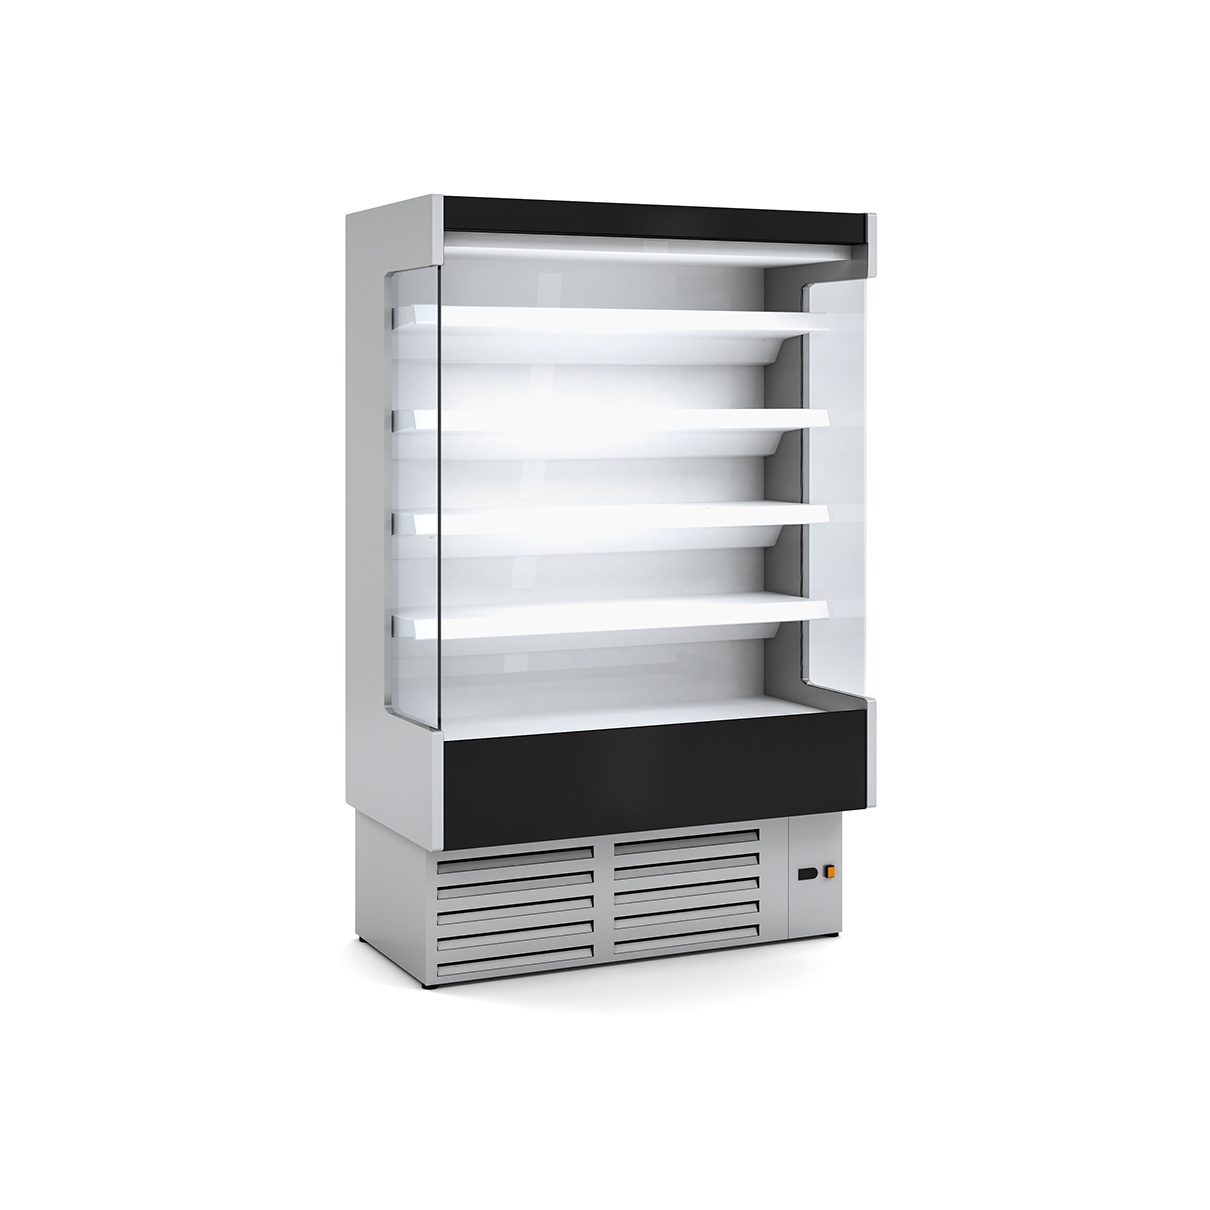 copy of REFRIGERATED WALL-MOUNTED DISPLAY CABINET DS0 M1-M2